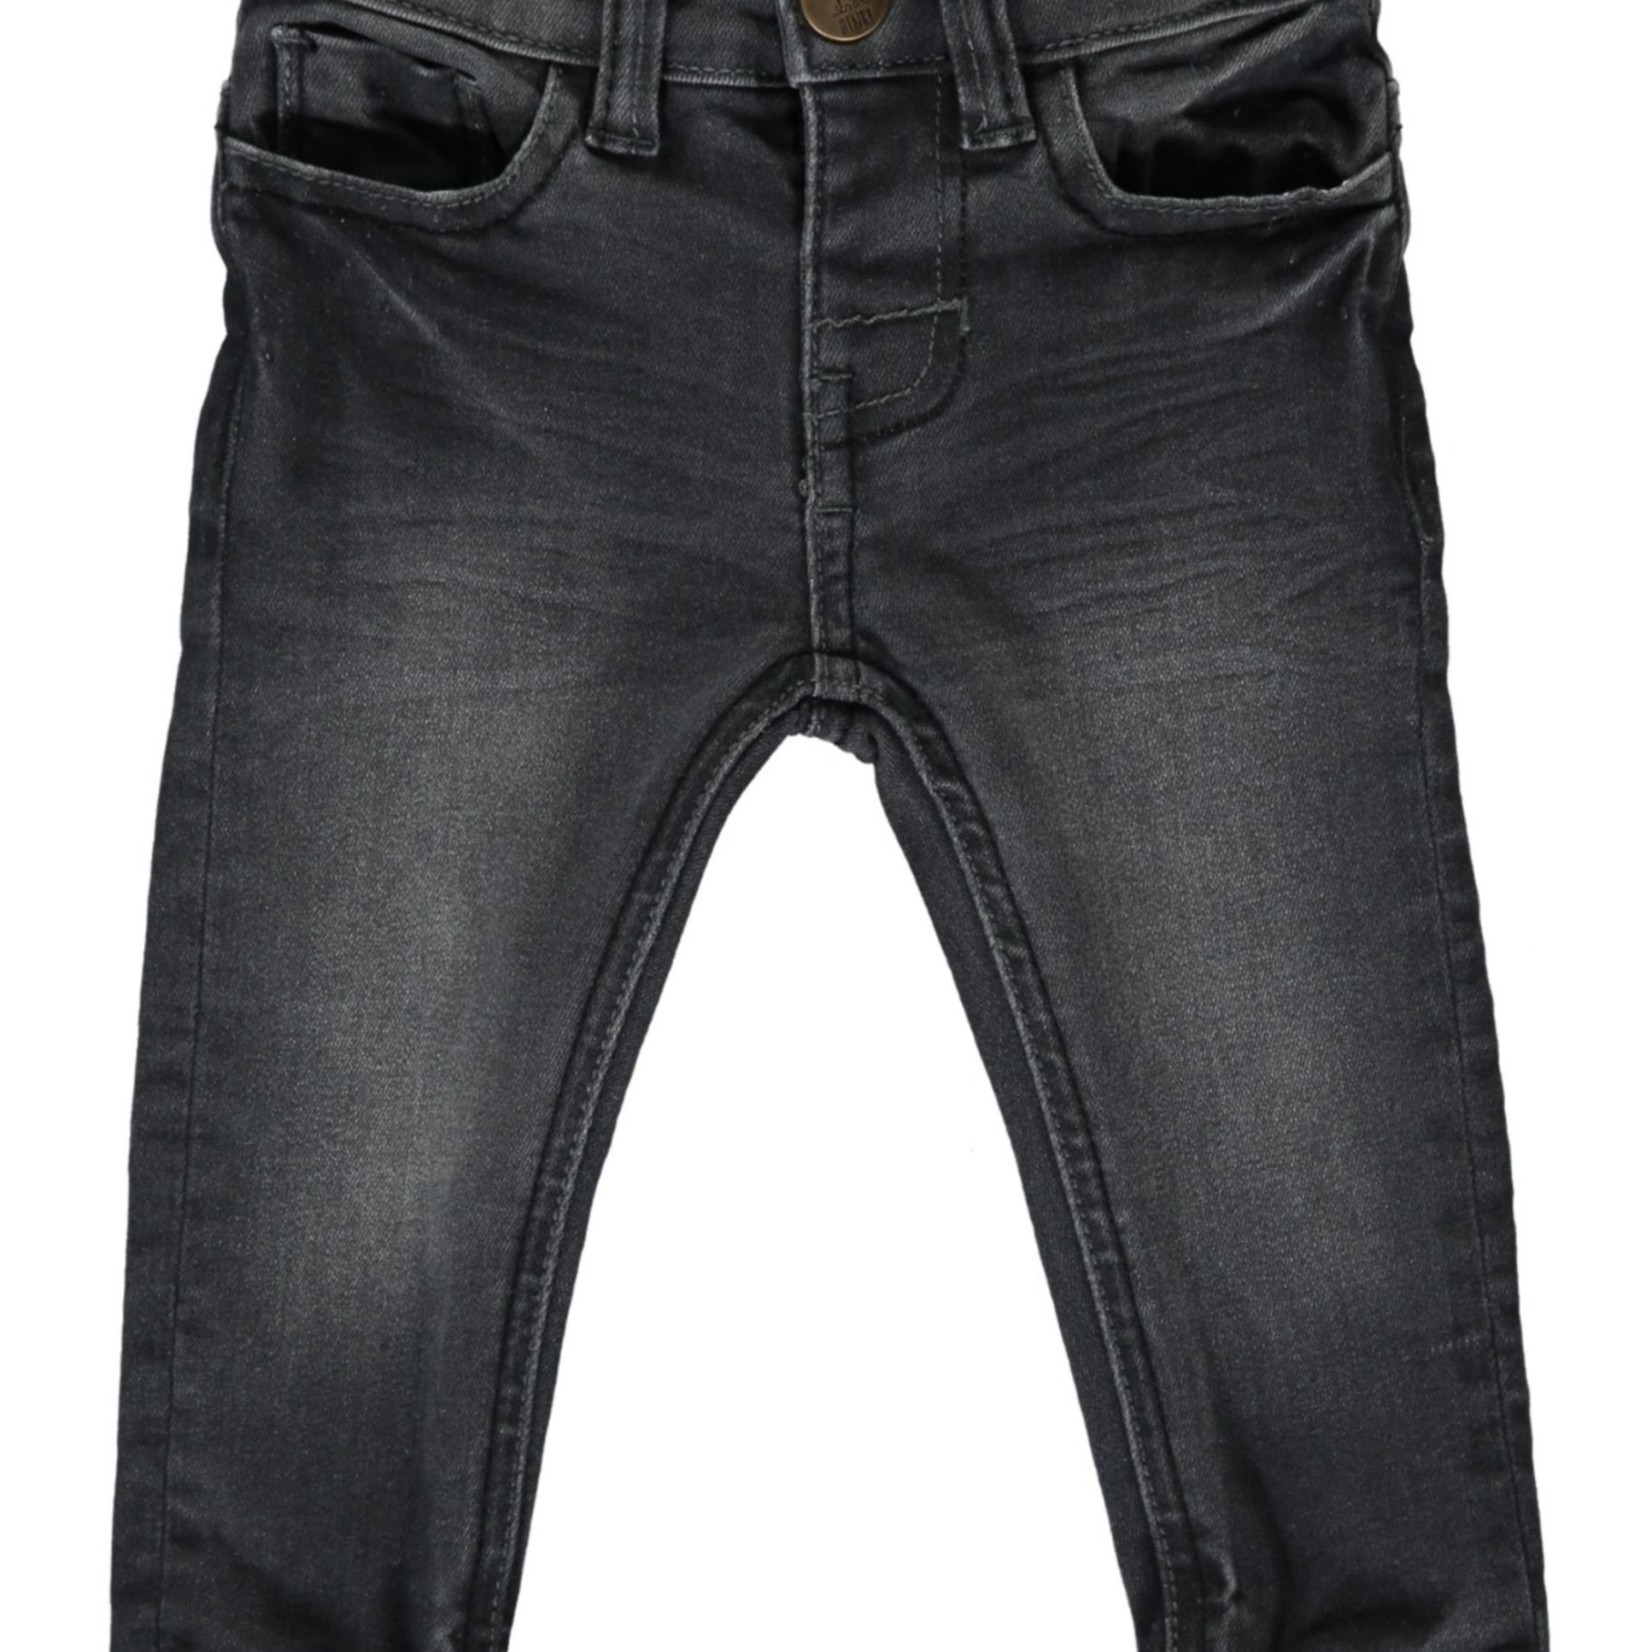 Me + Henry Charcoal Jeans Baby Slim Fit Denim